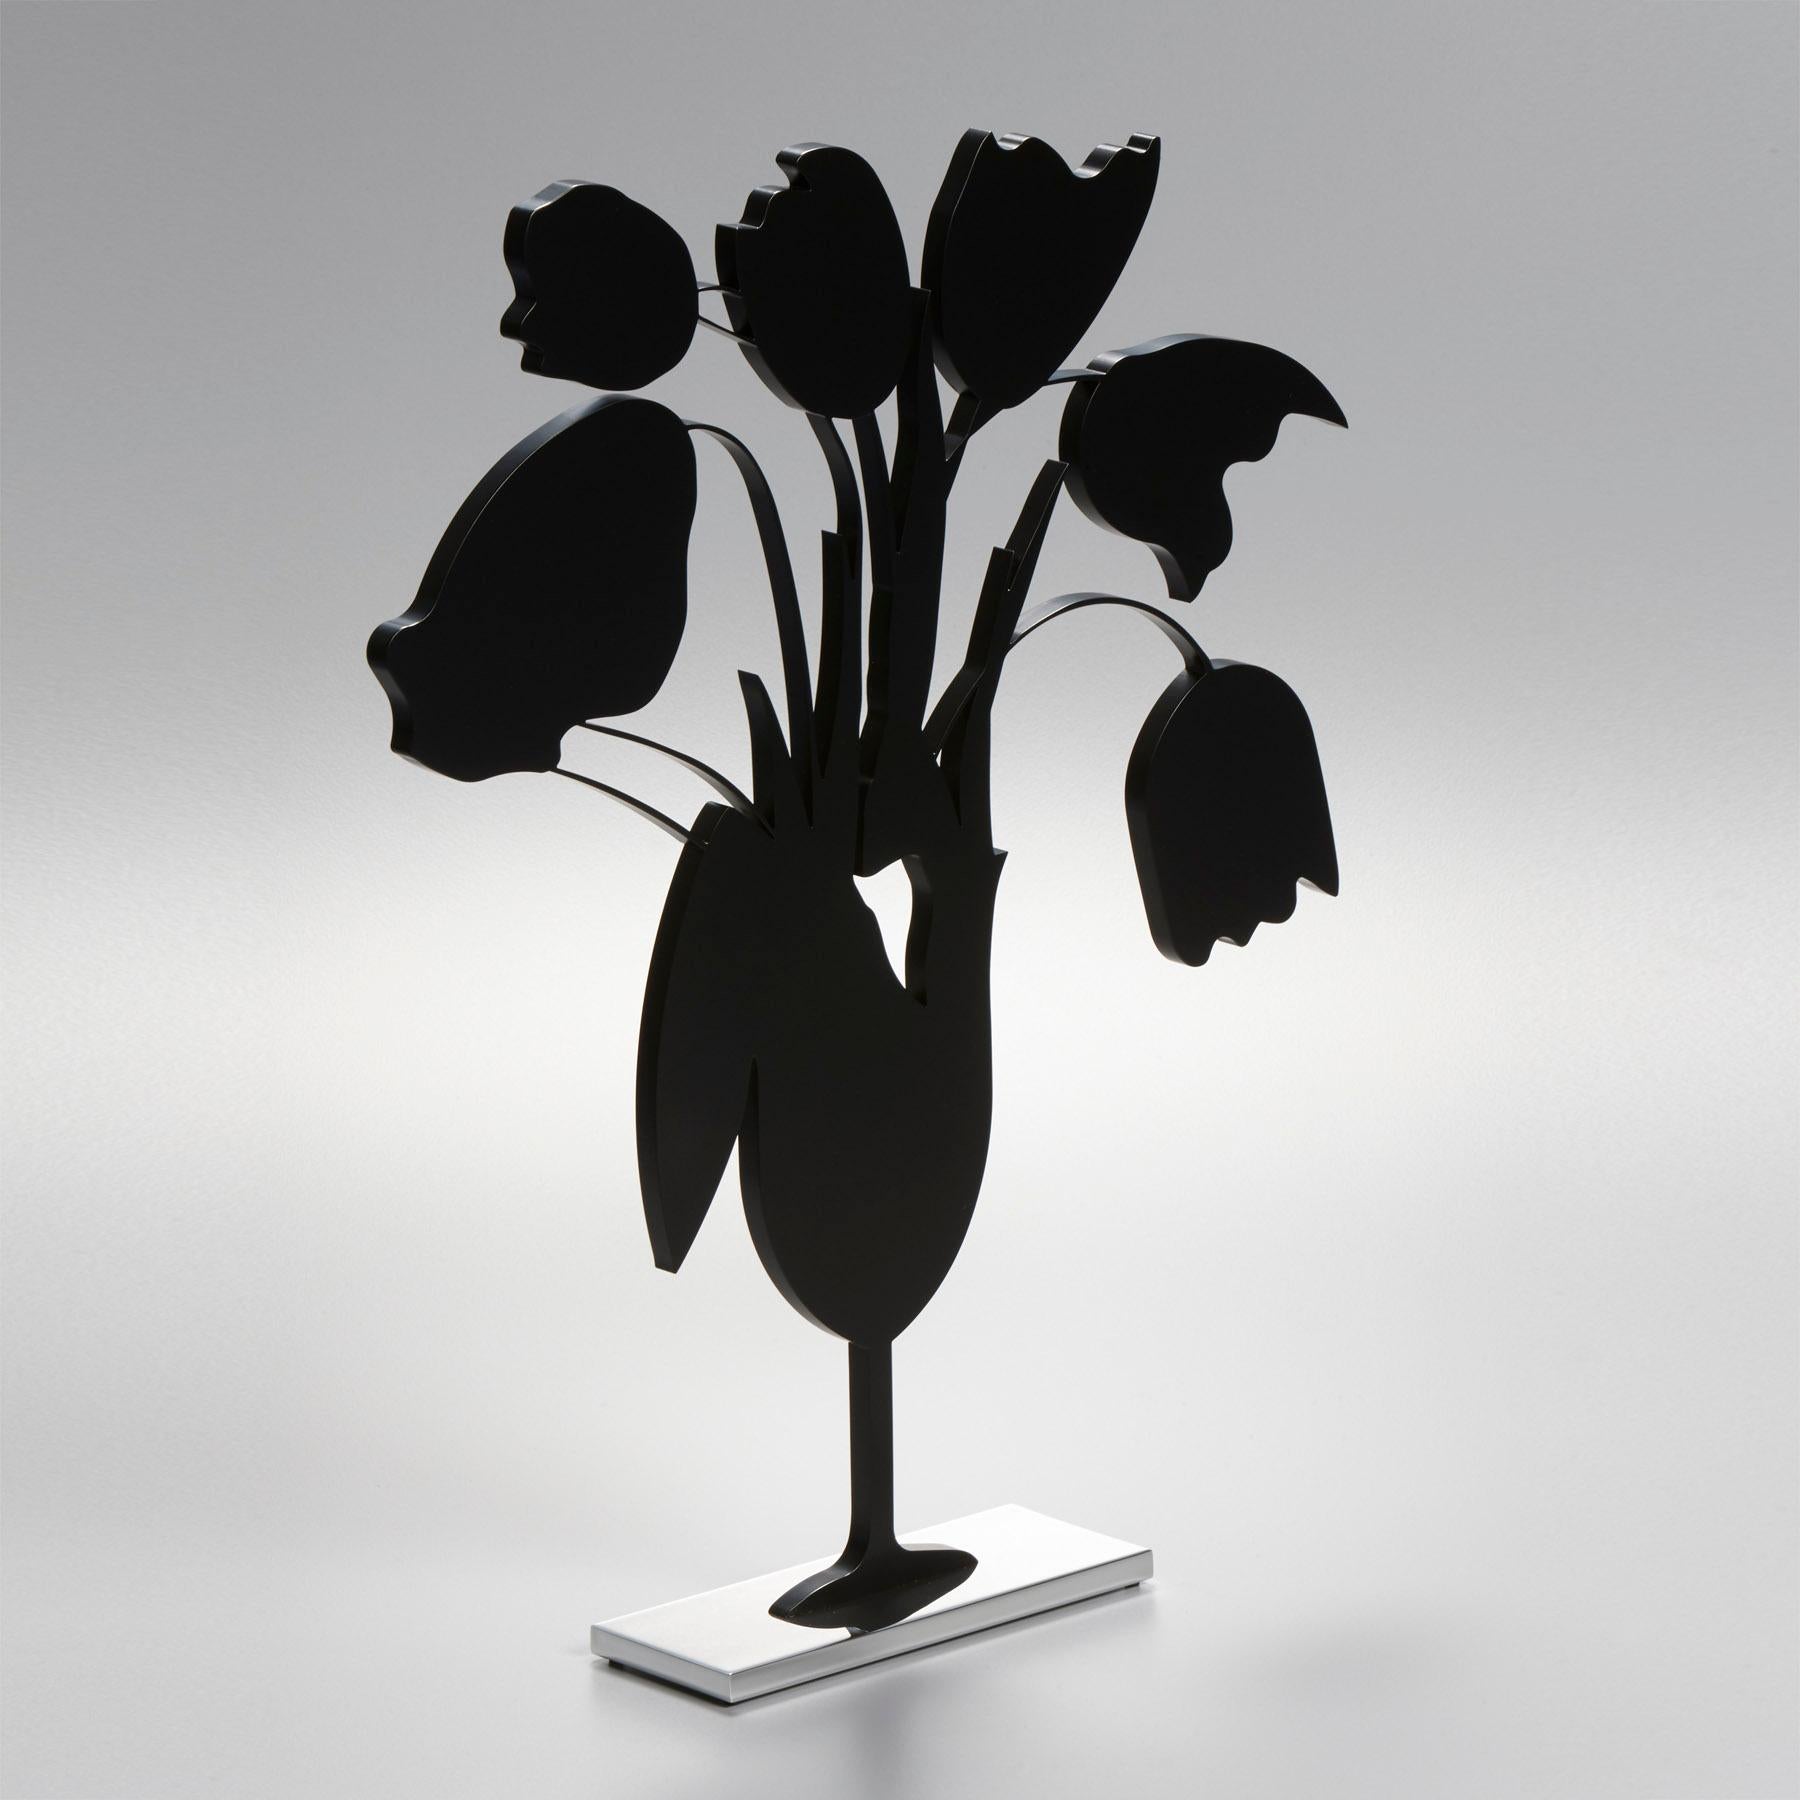 Belonging to the famous Flower series, this sculpture is an abstract reinterpretation of still life tradition.

Donald Sultan, Black Tulips and Vase, April 5
Black Tulips and Vase, April 5 - Contemporary, 21st Century, Sculpture, Black 
Painted